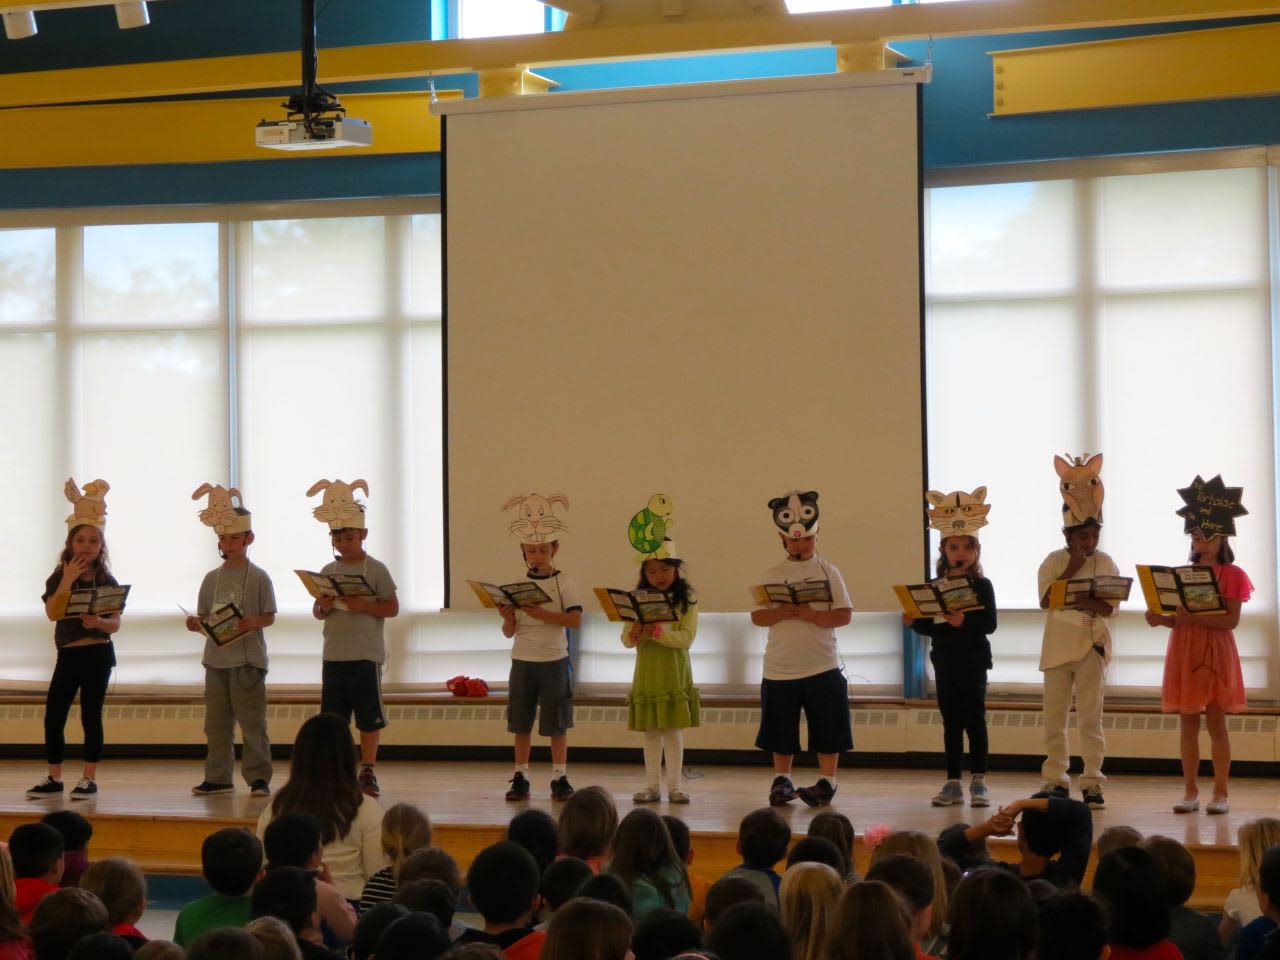 First-grade students at Todd Elementary School in Briarcliff Manor acted out “The Tortoise and the Hare” during a special assembly recognizing the school as a Habits of Mind International School of Excellence.